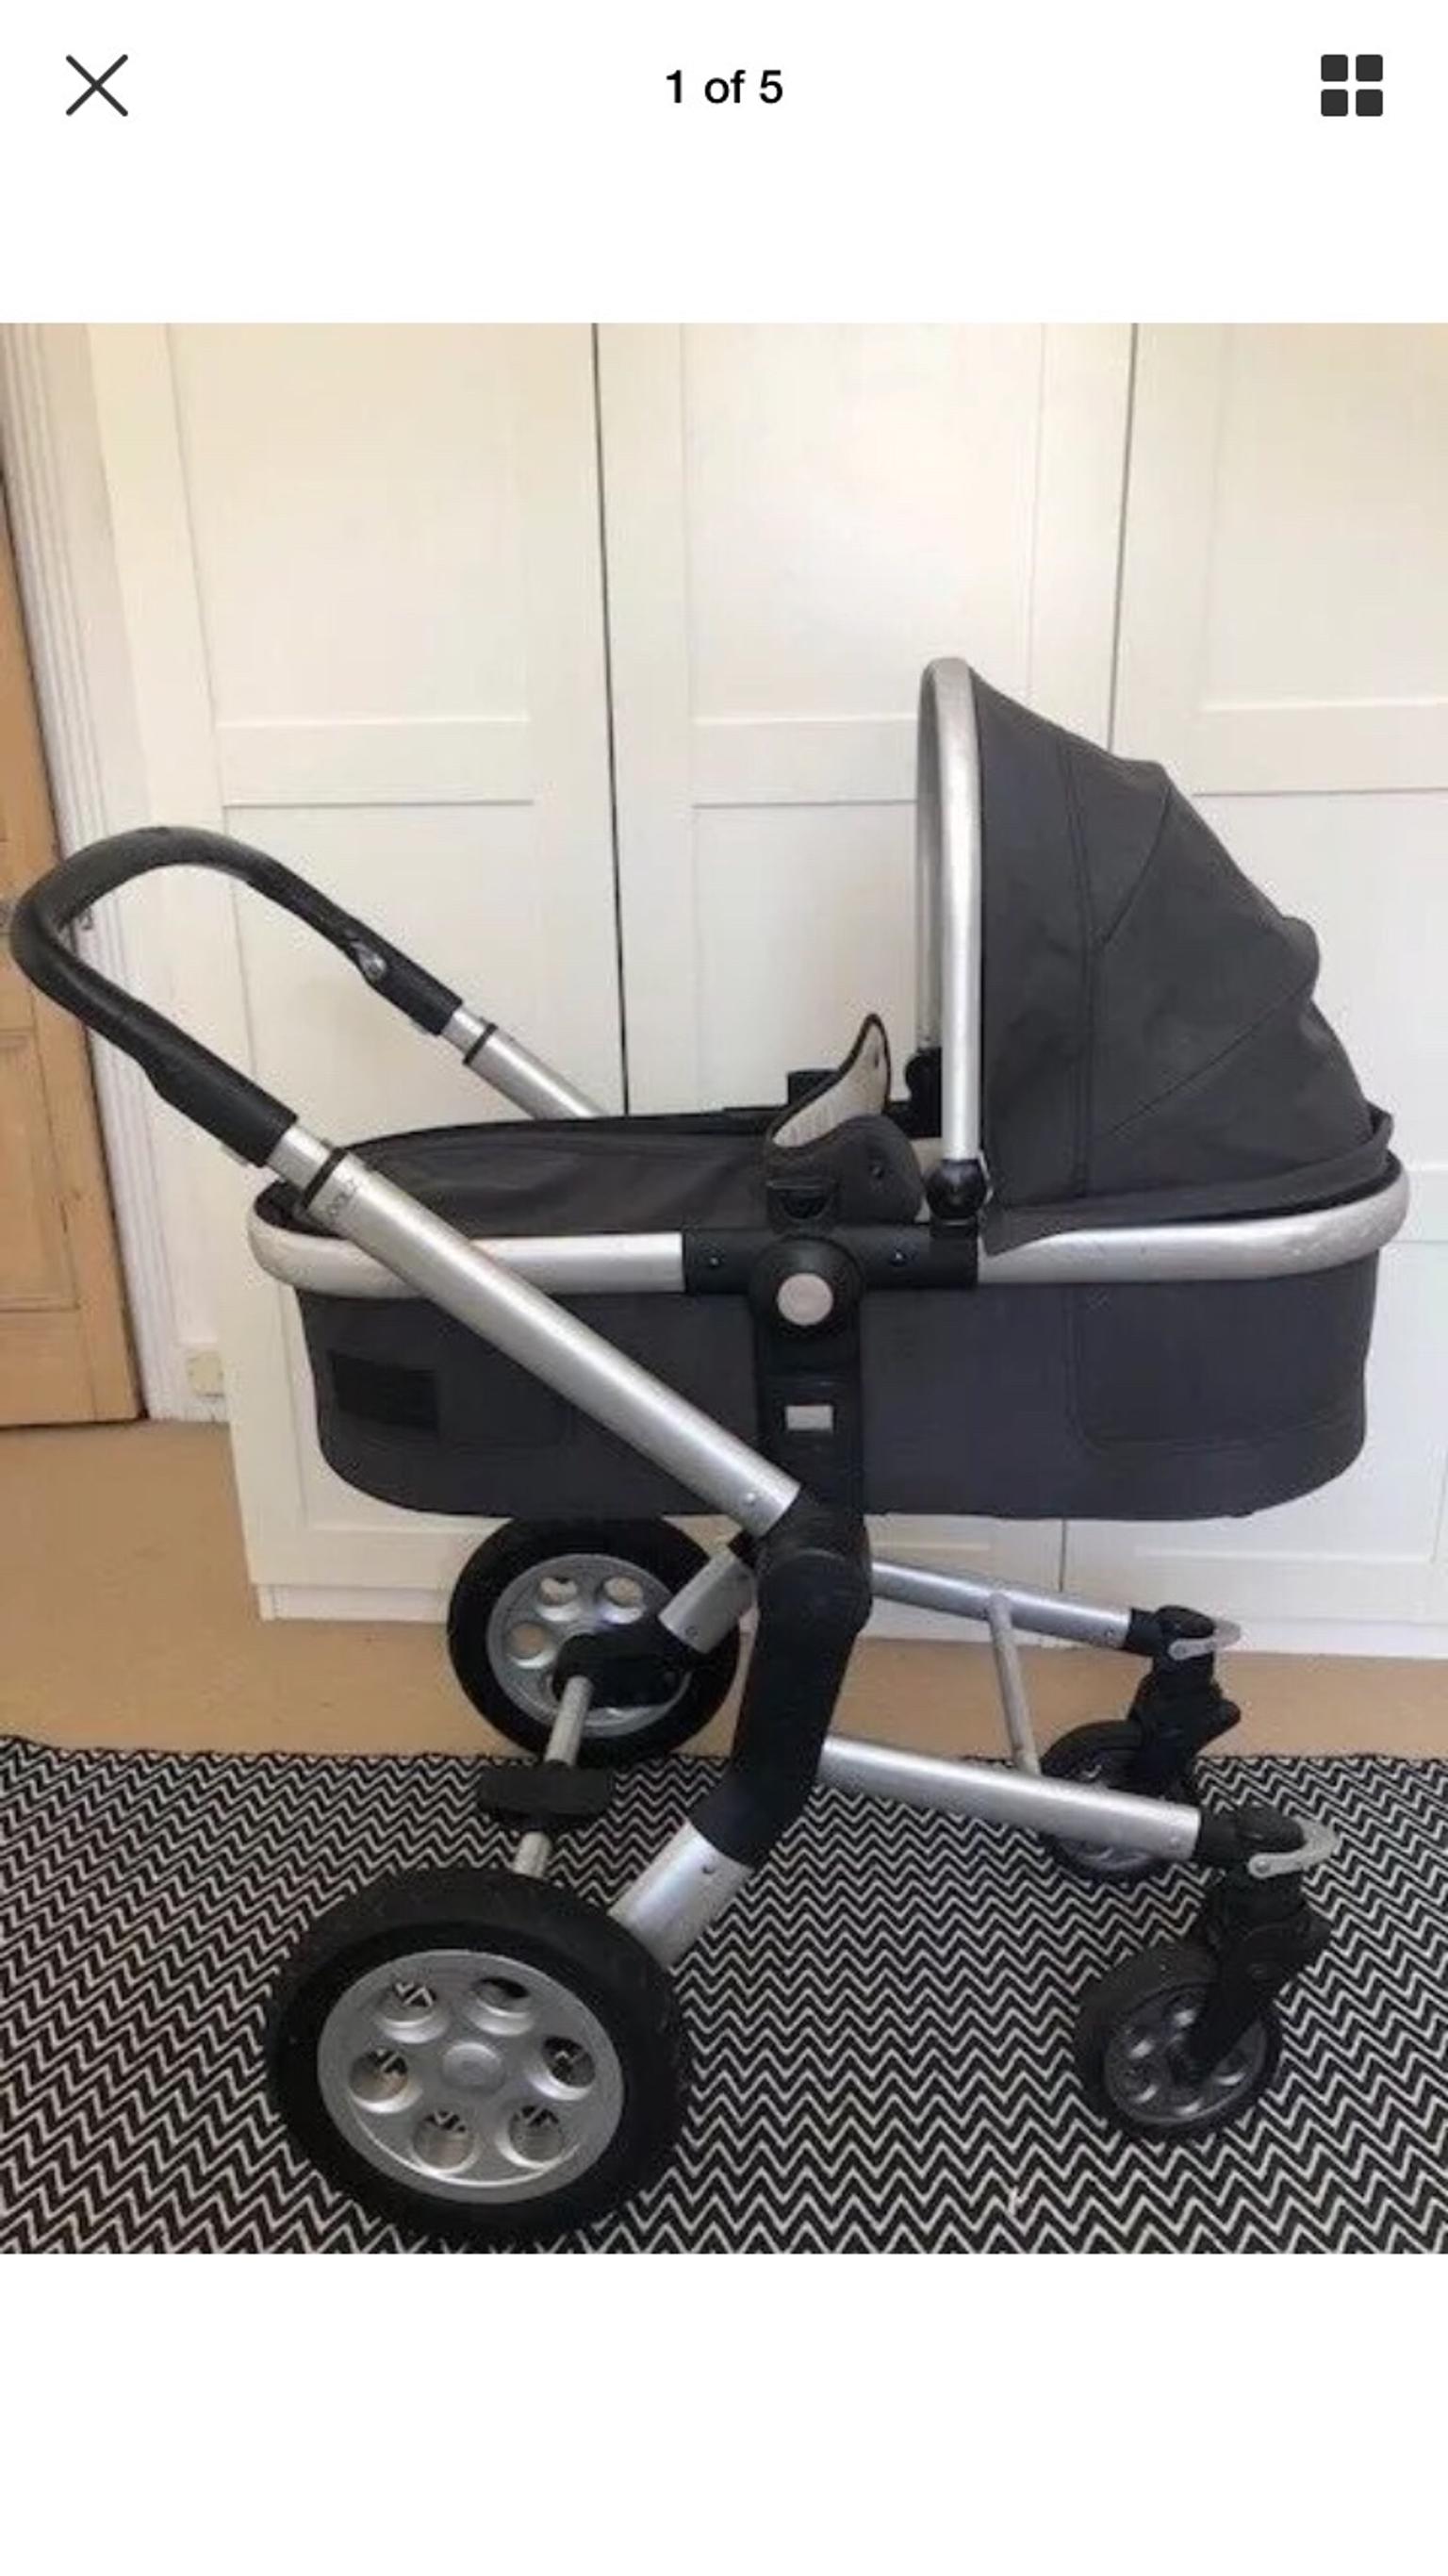 graco snap and go double stroller